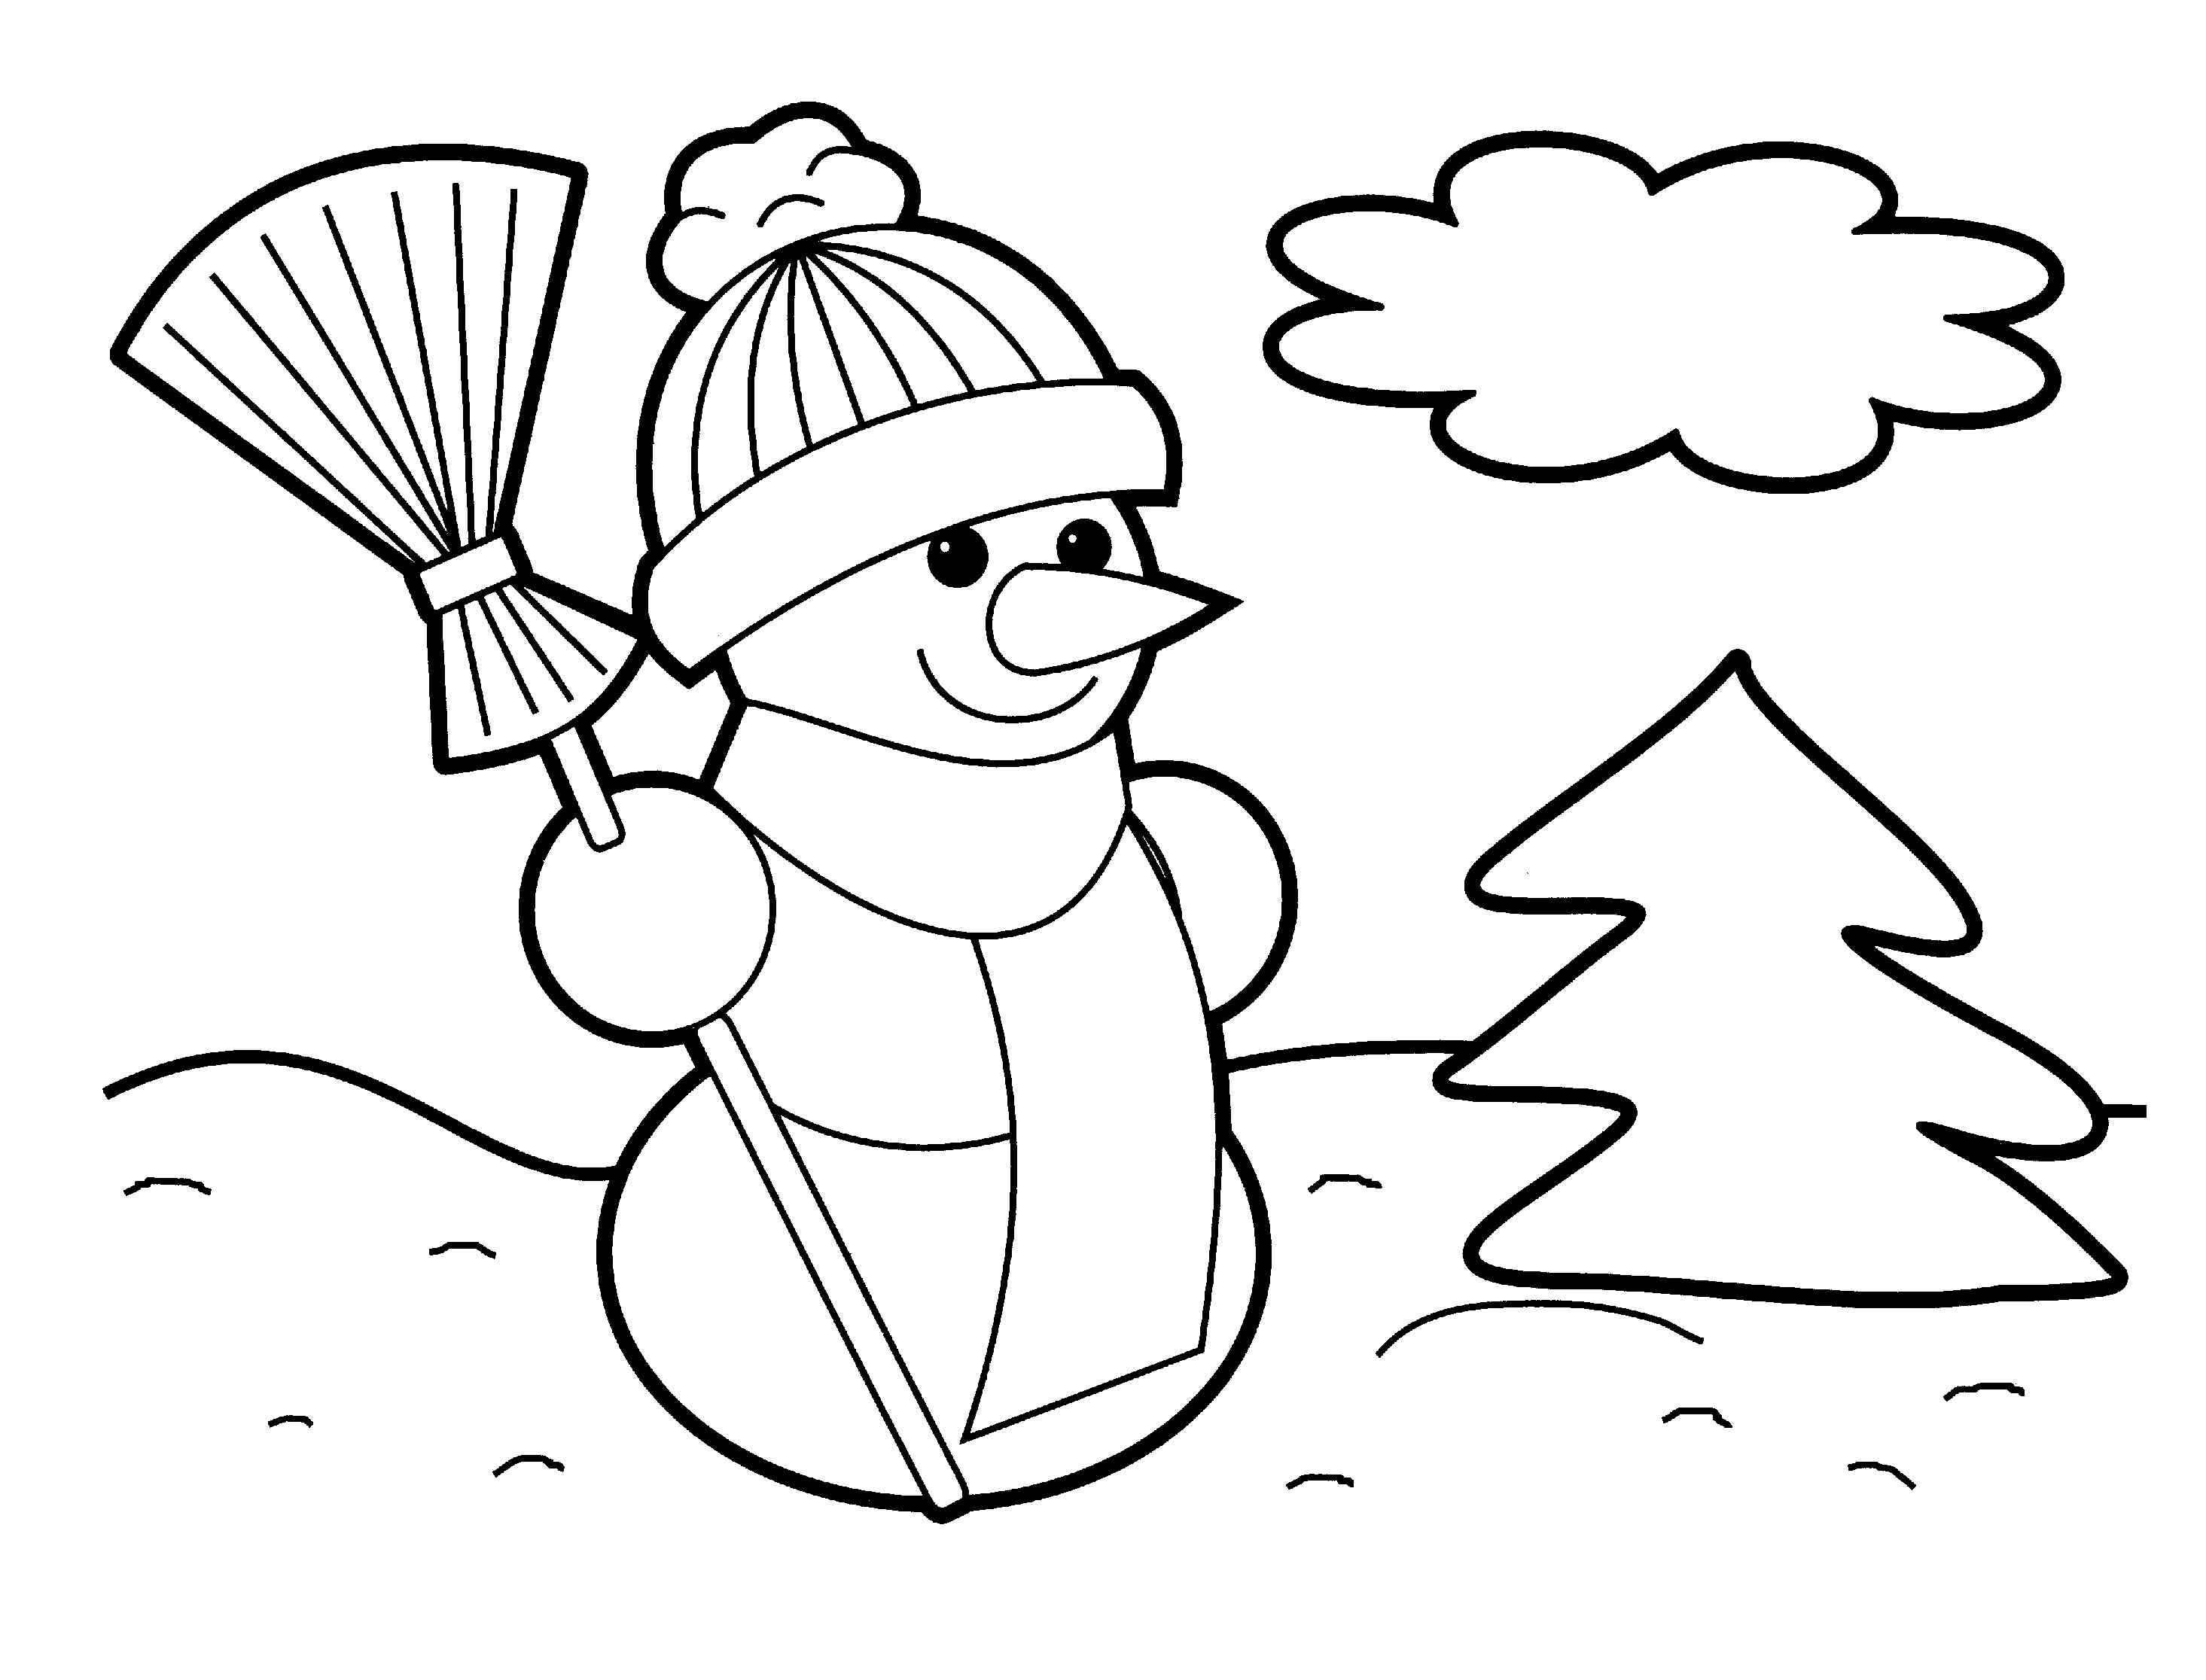 Christmas Tree Lights Coloring Pages at GetColorings.com | Free